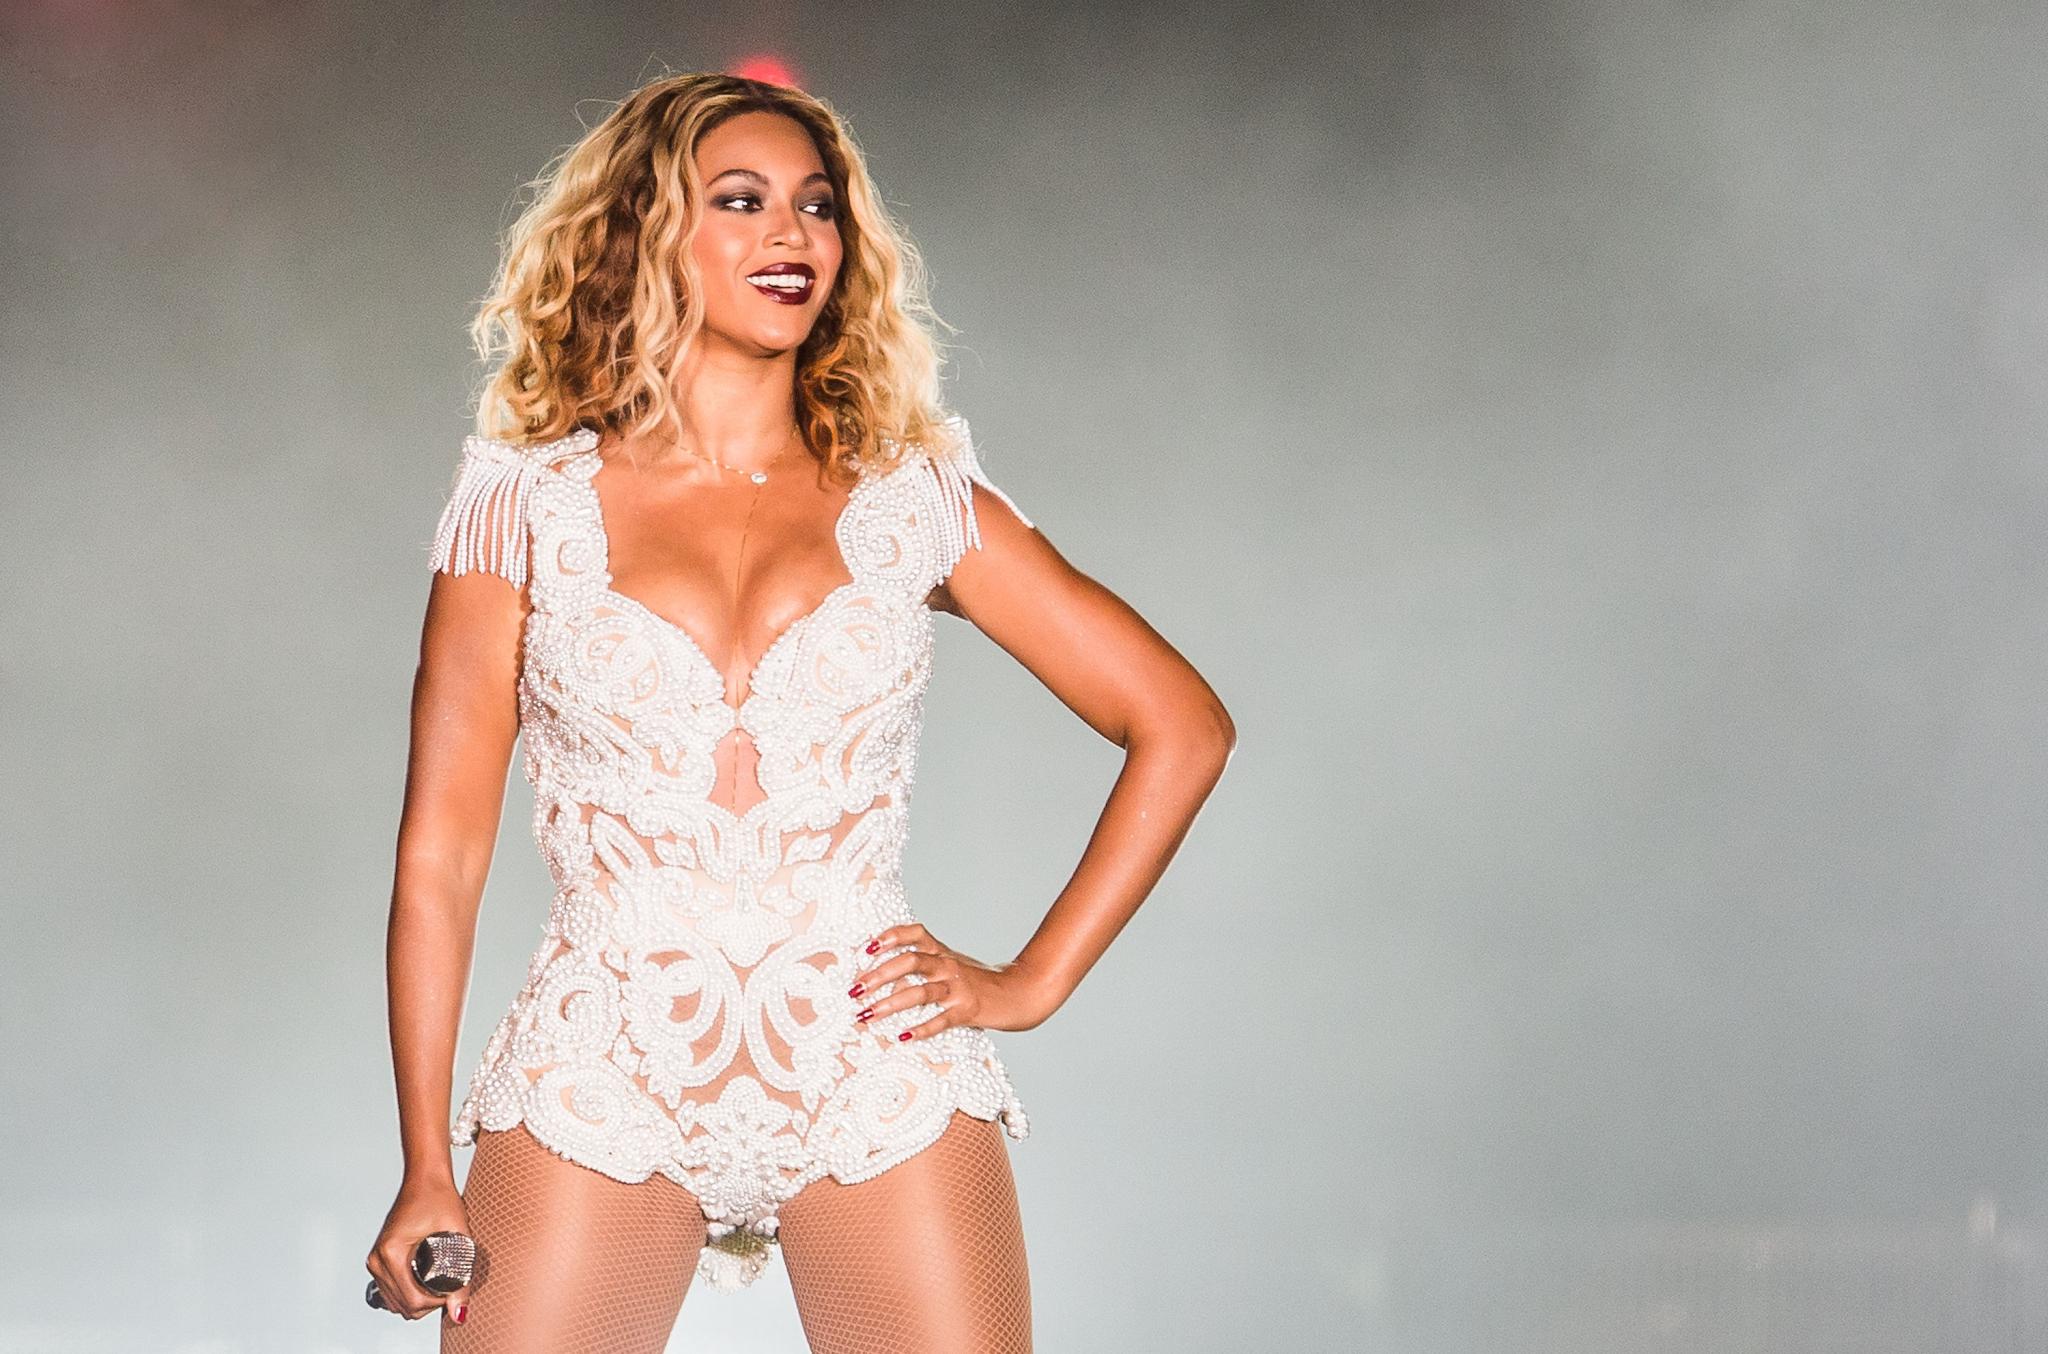 Beyoncé's Foundation Offers Aid to the People of Flint